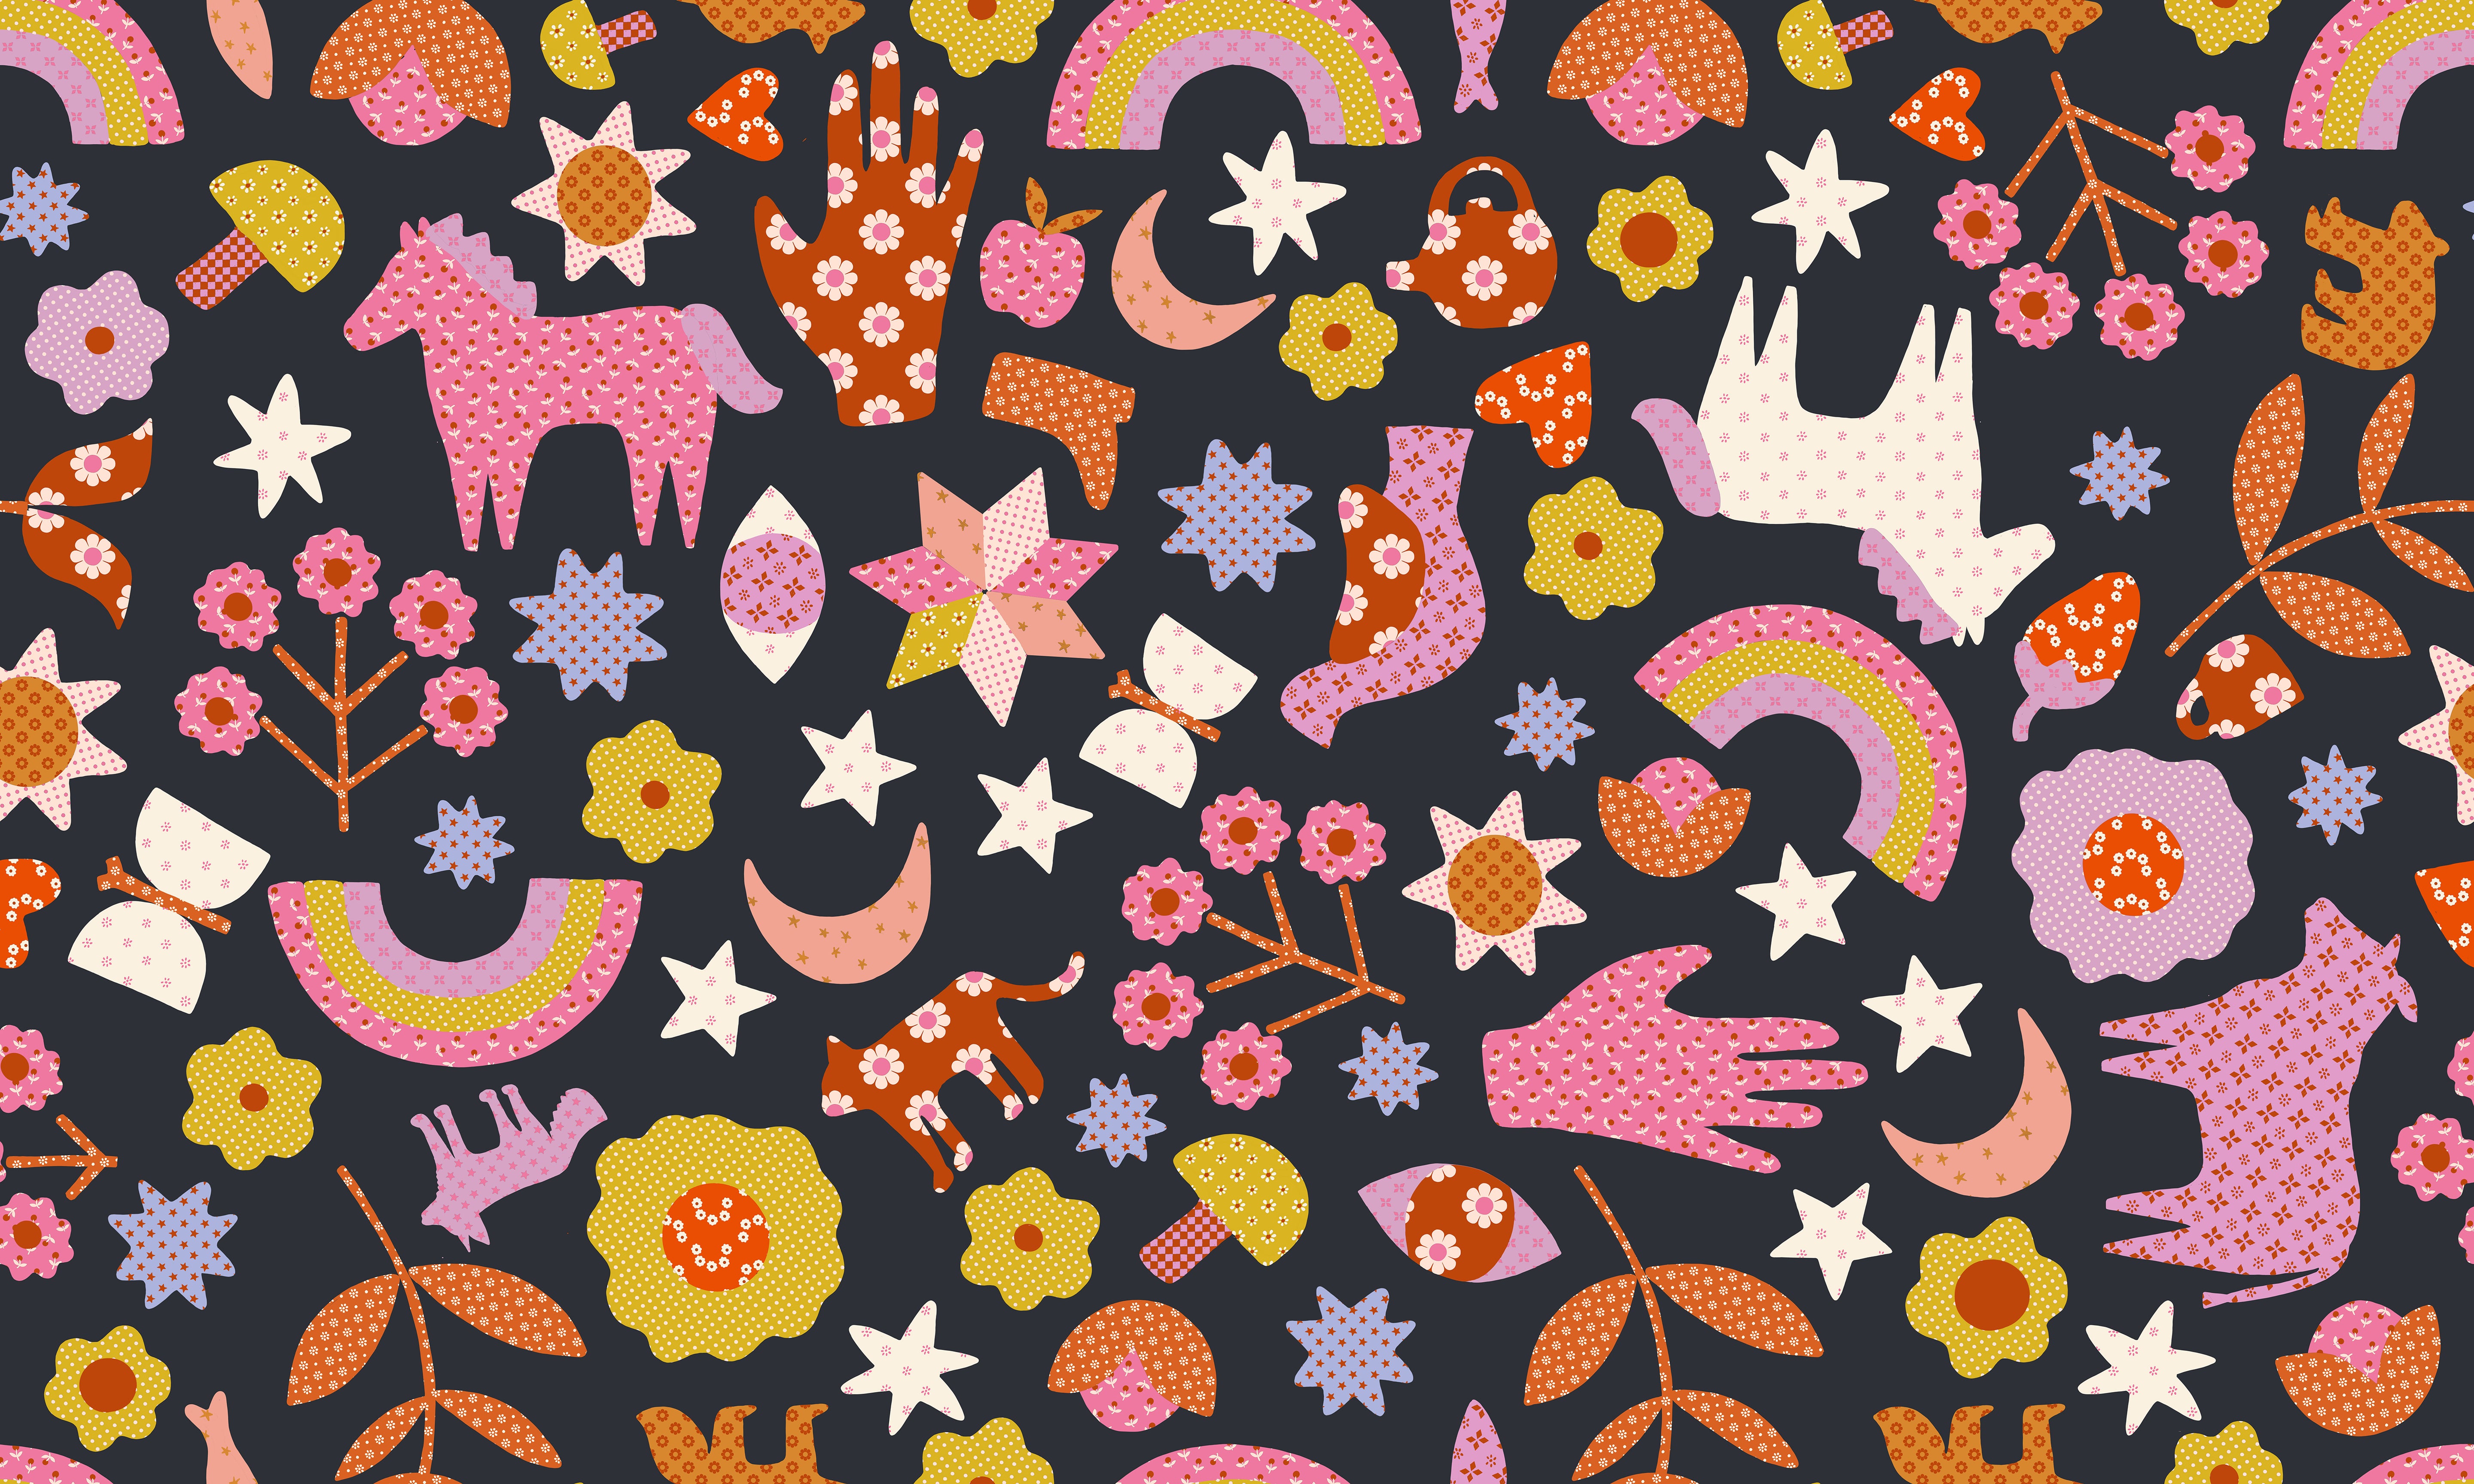 Meadow Star - Applique Menagerie in Soft Black | Quilting Cotton